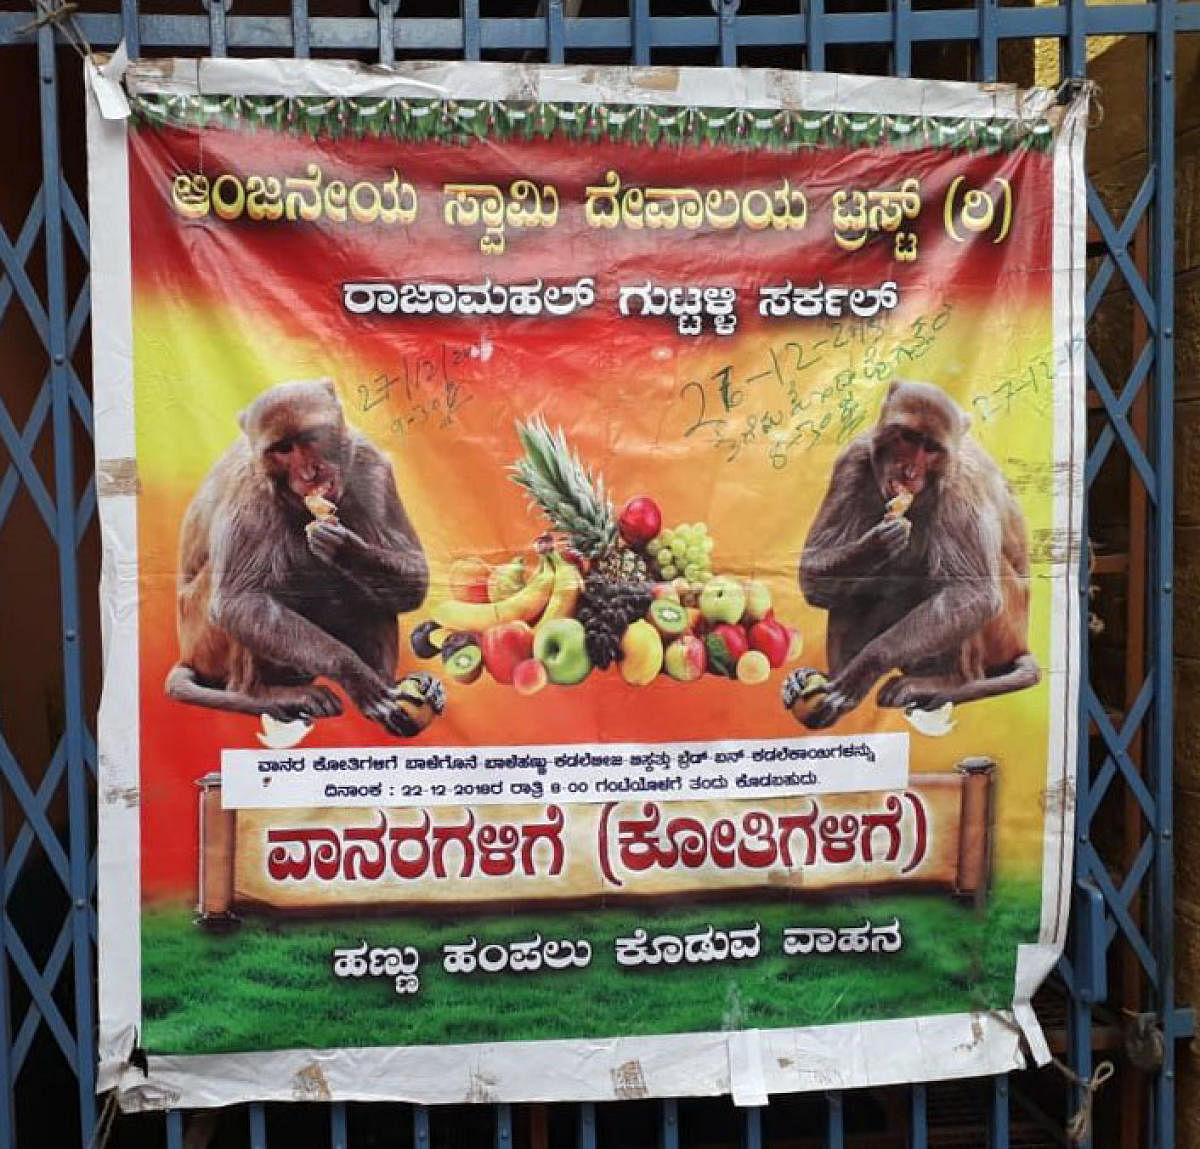 A poster inviting devotees to feed the monkeys displayed at the temple.